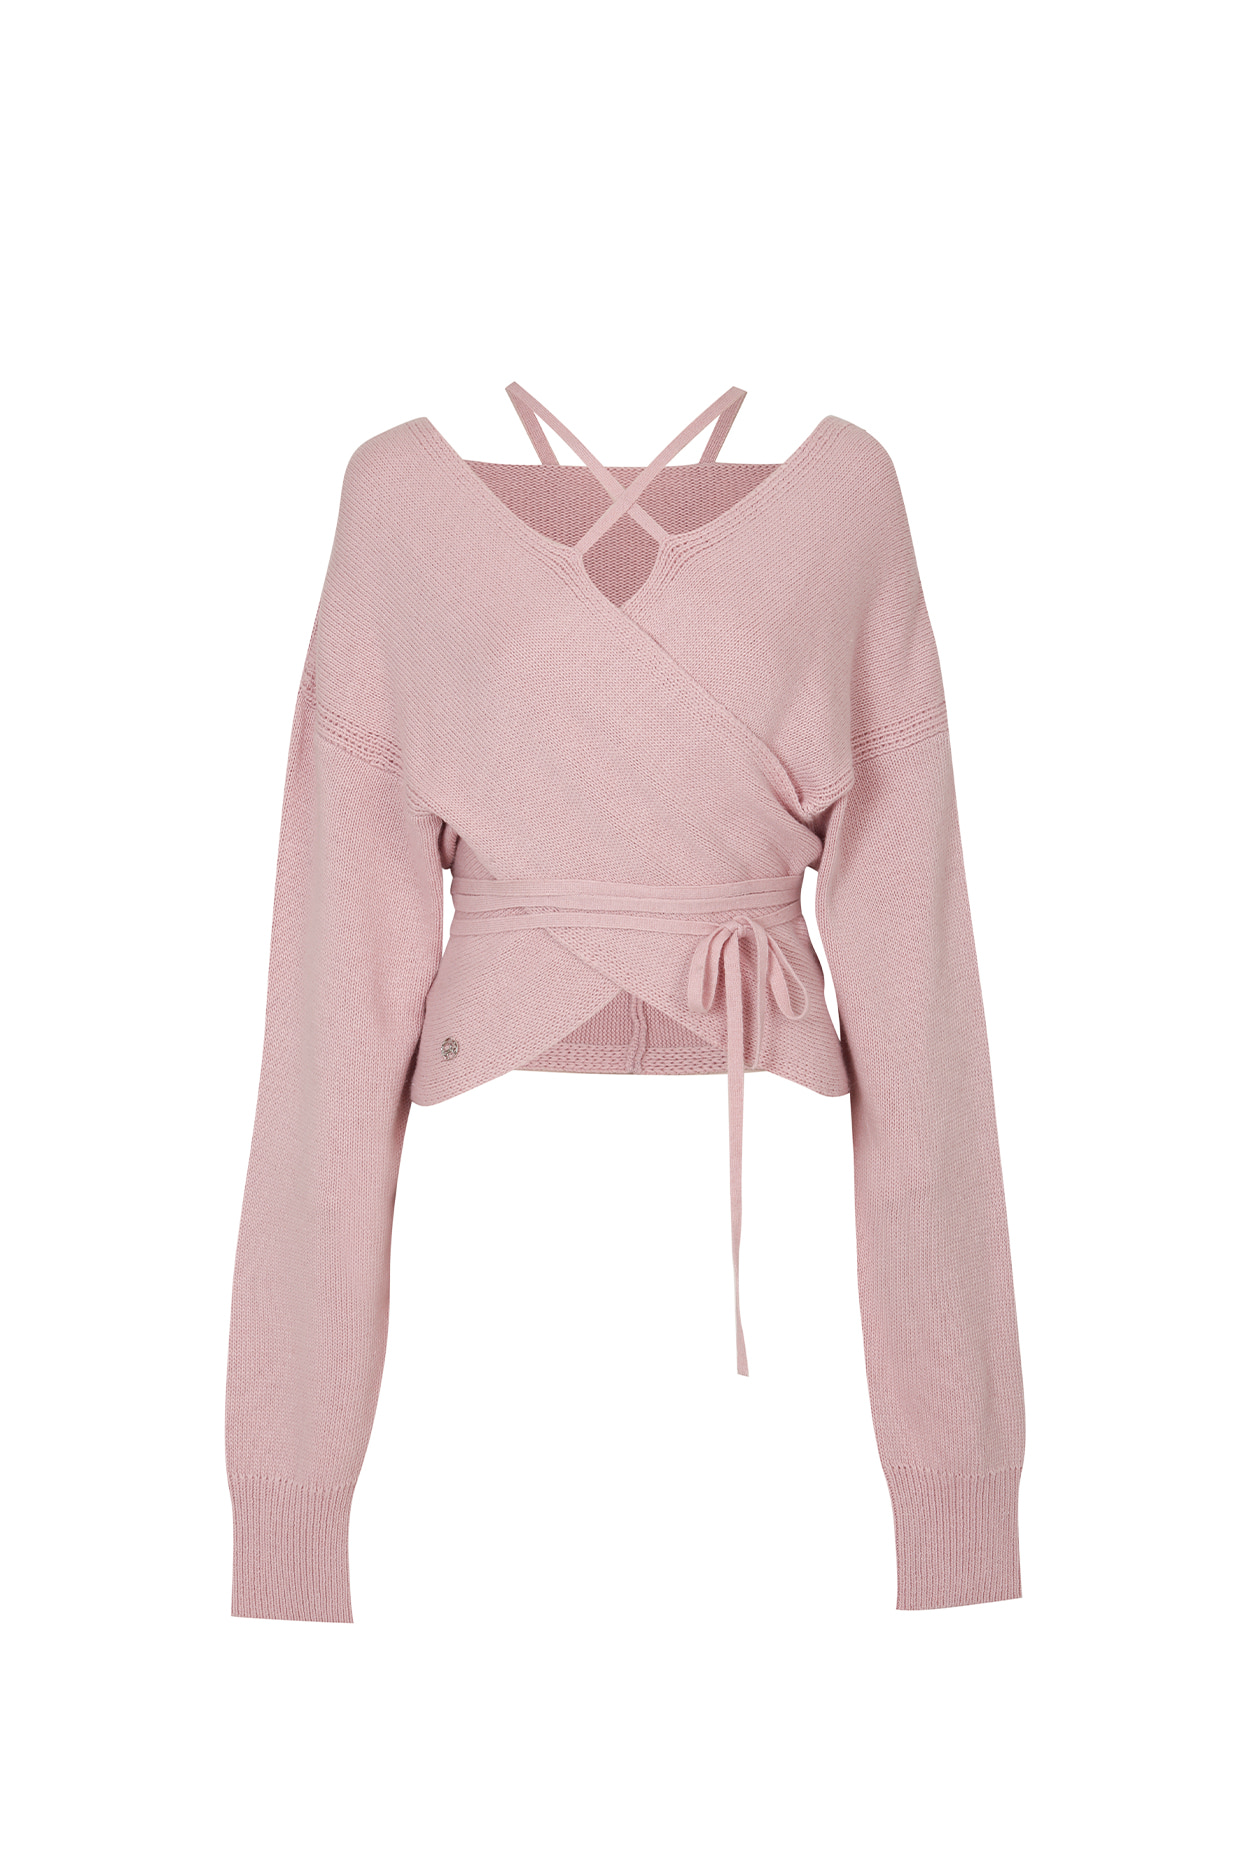 IRIS WRAP KNIT pink [9/22 pre-order delivery]